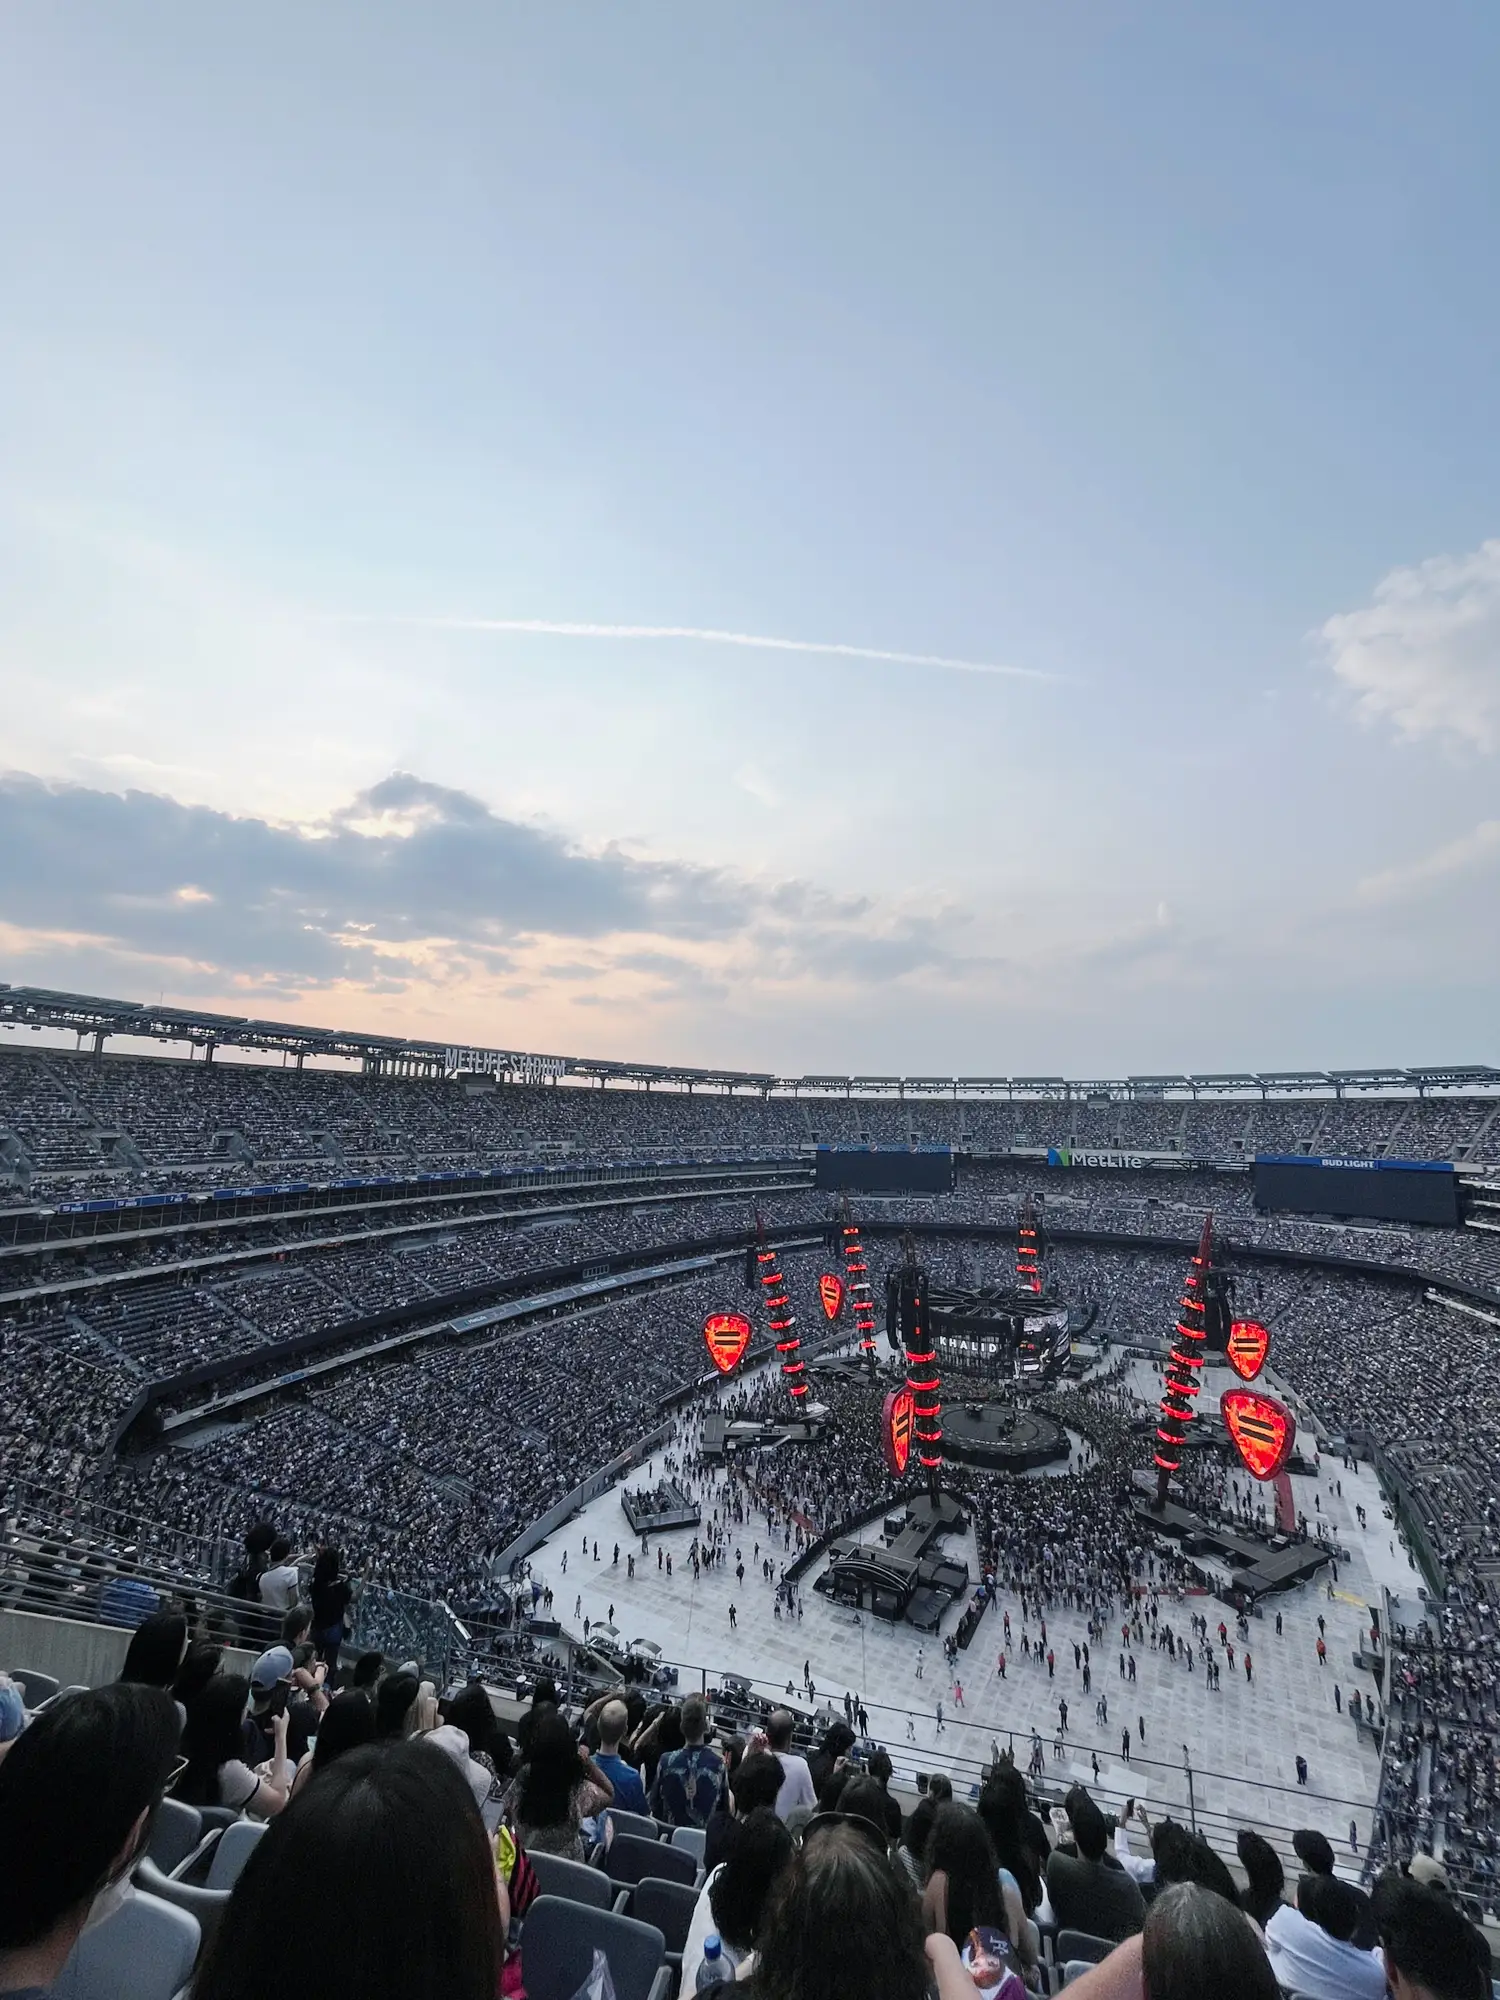  A large crowd of people are gathered in an arena, watching a concert. The audience is seated on chairs and there are several rows of seats. The event is sponsored by Coca Cola and Pepsi. The crowd is engaged in the performance and there are